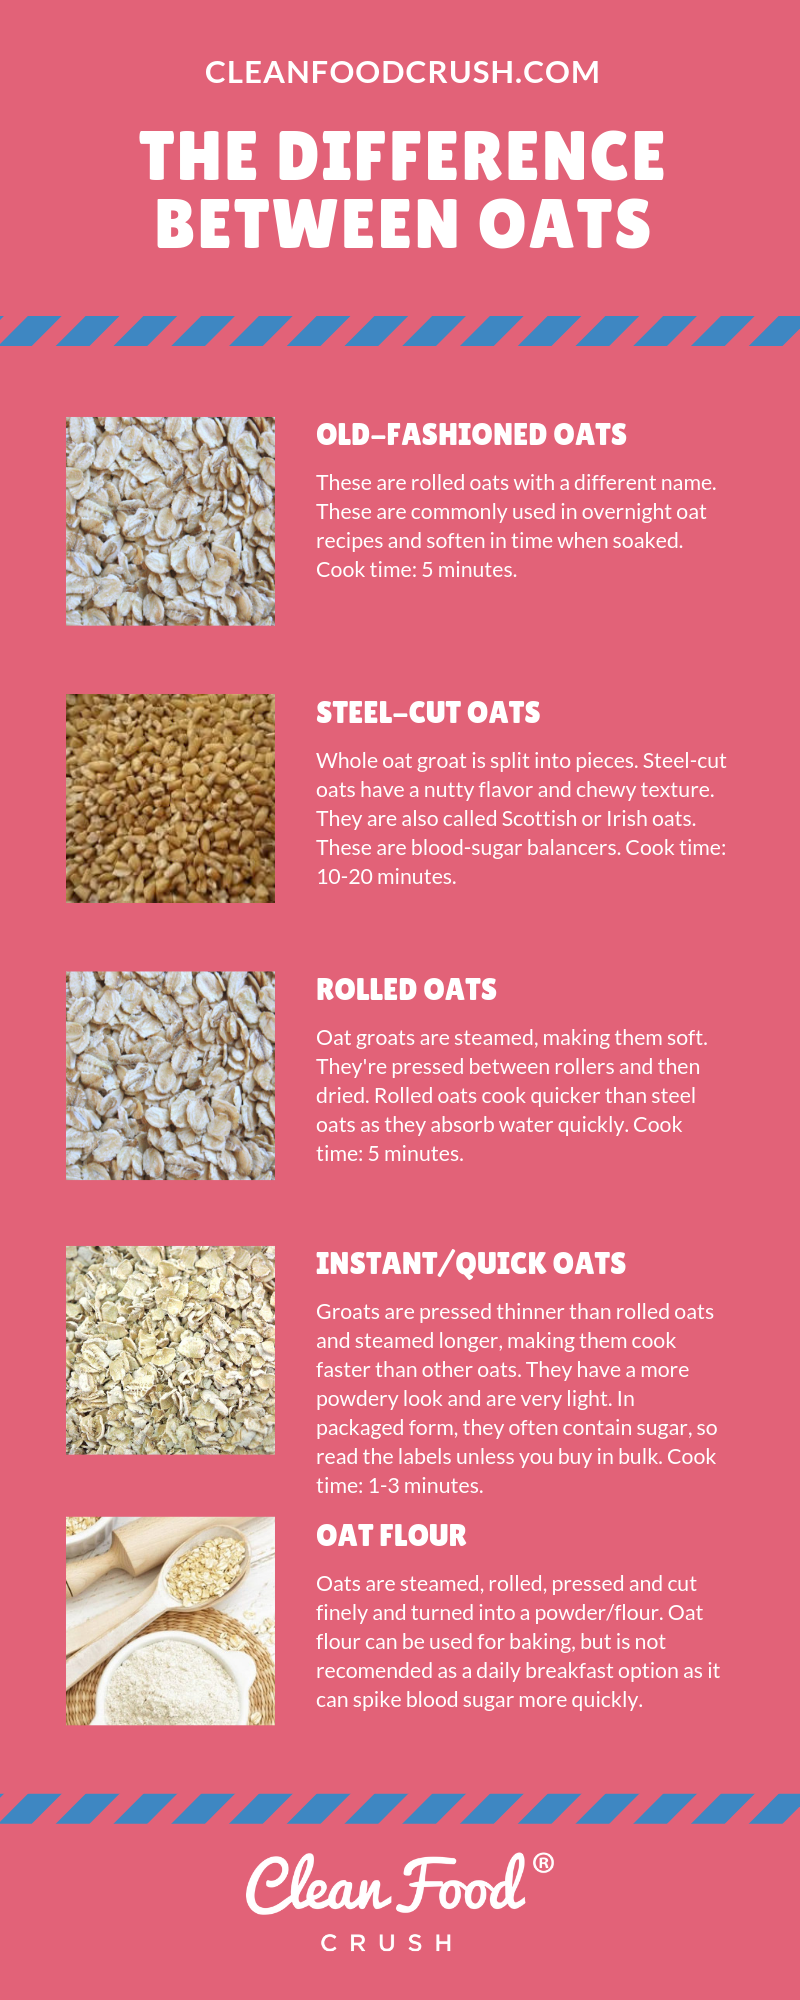 Does Oatmeal Clean You Out? - Learn Methods